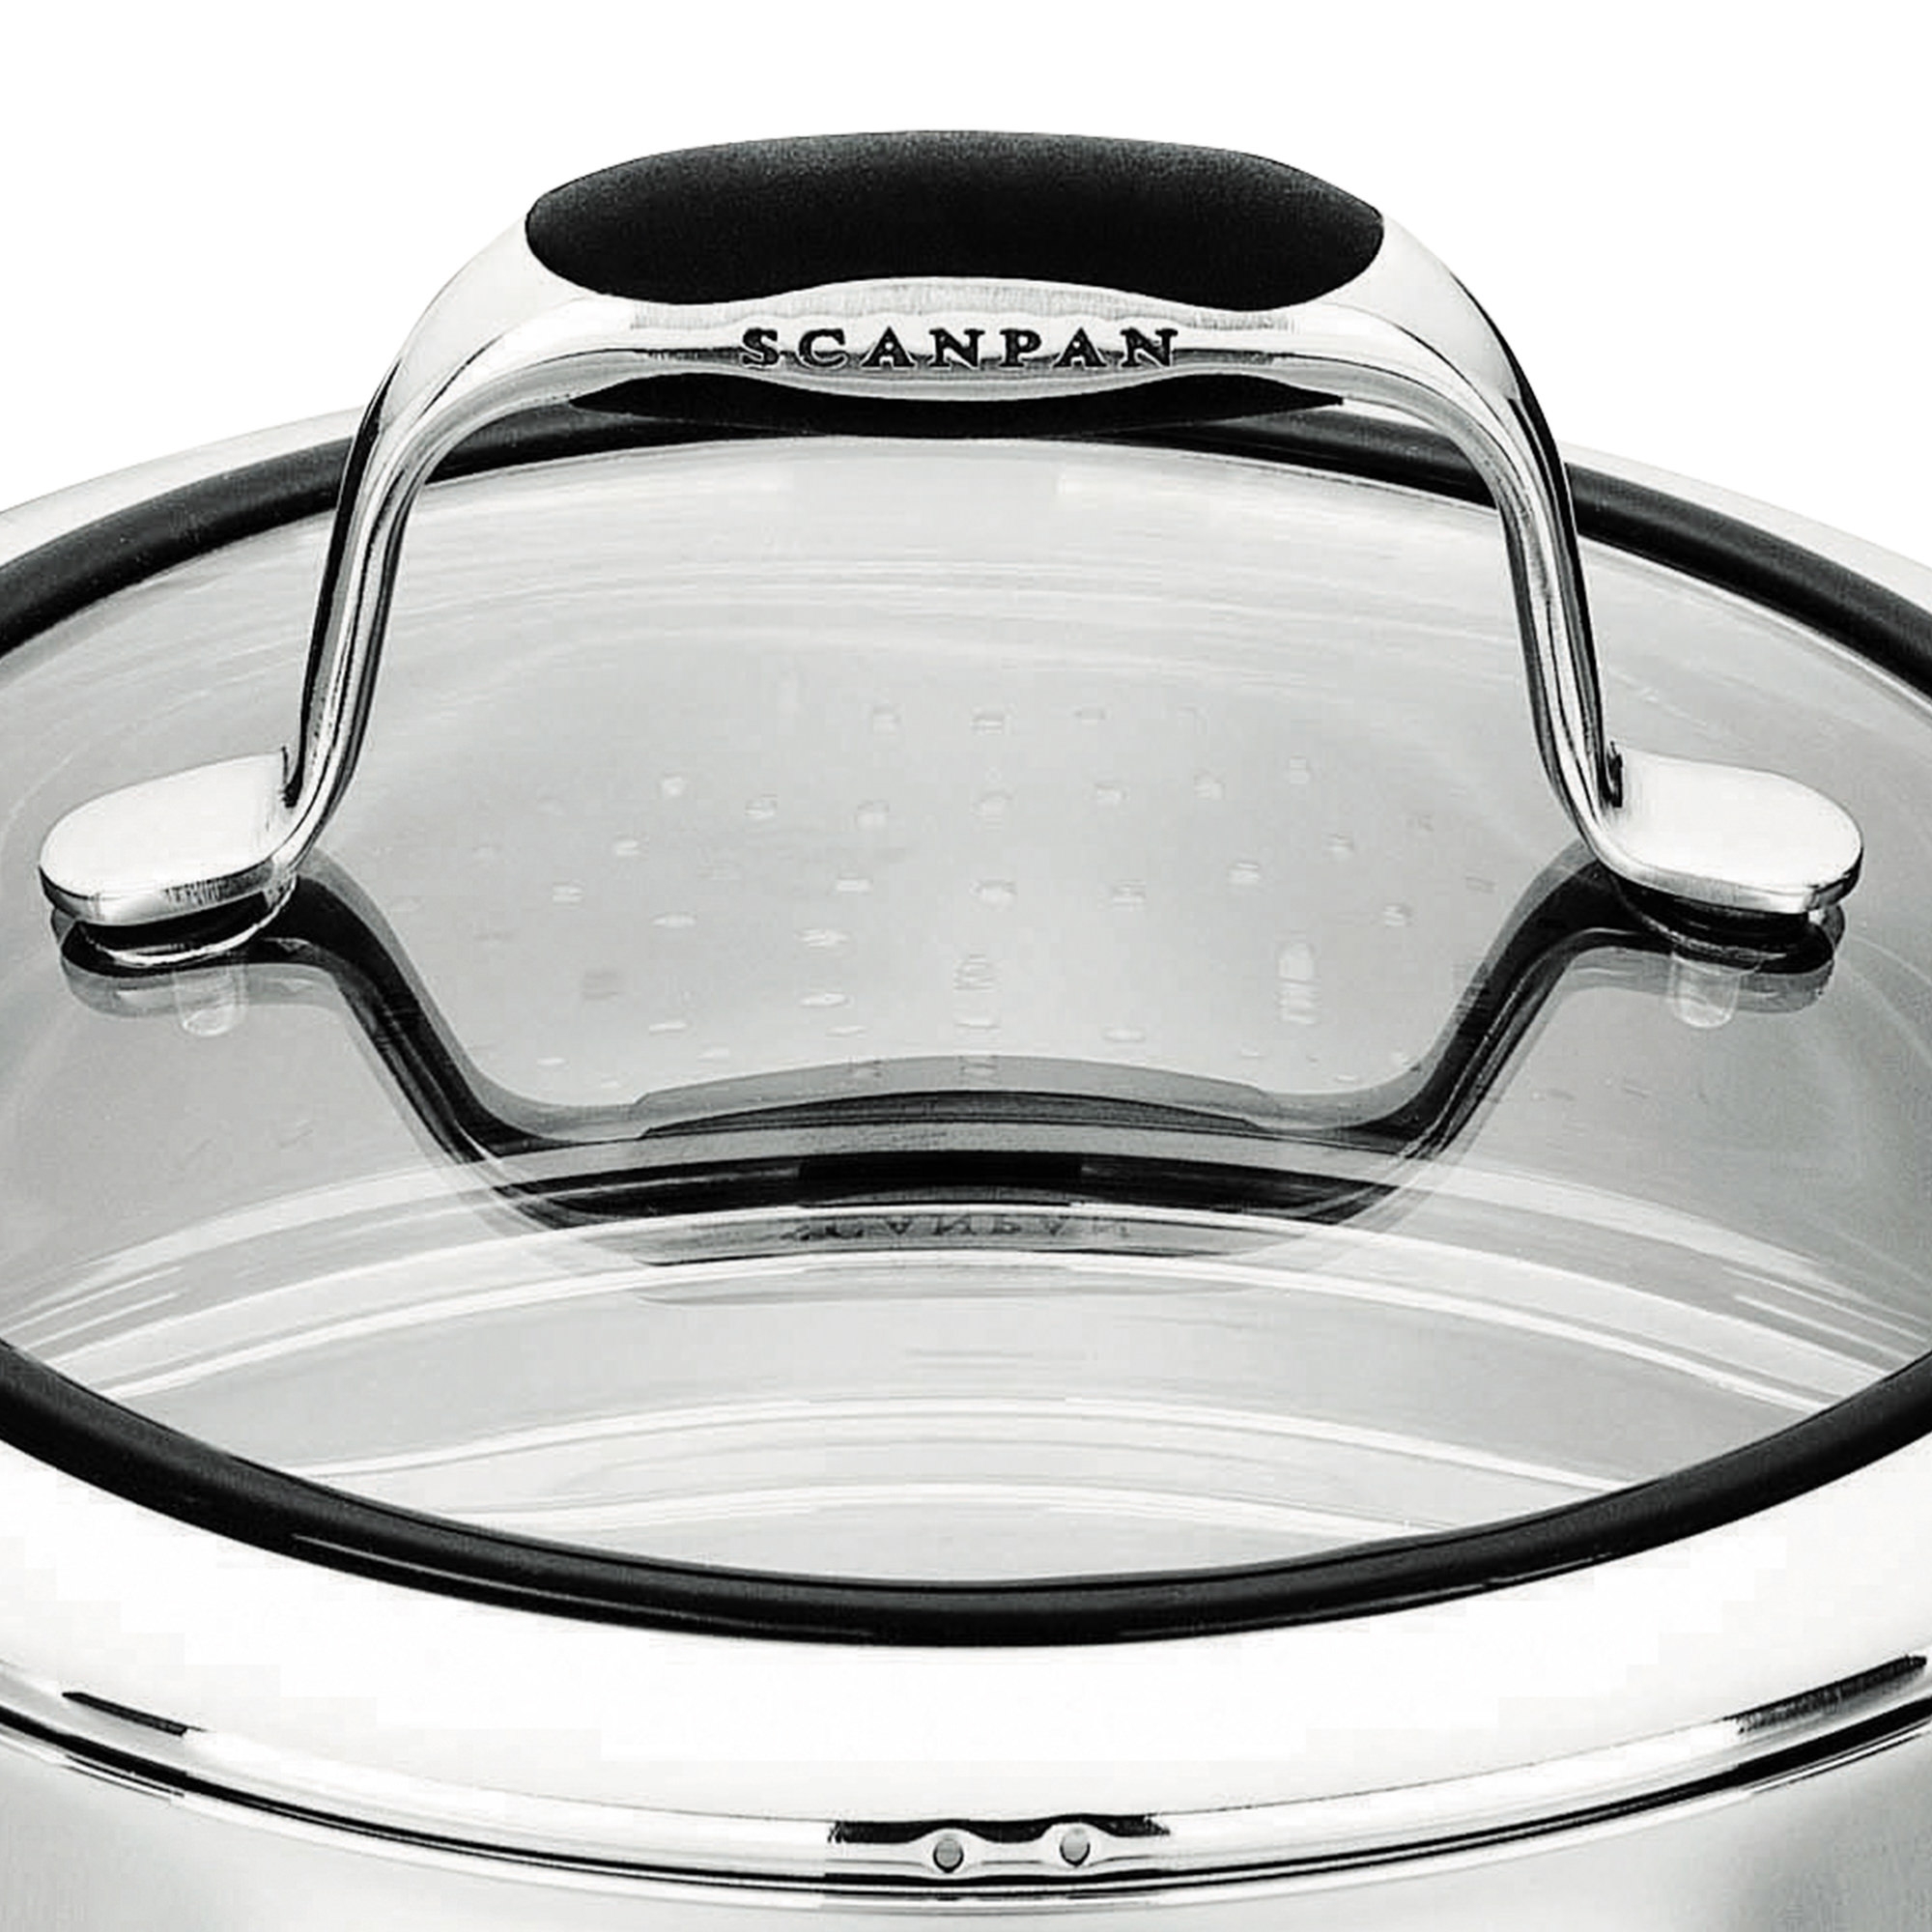 Scanpan Coppernox Covered Multi Steamer Insert with Lid 20cm Image 2